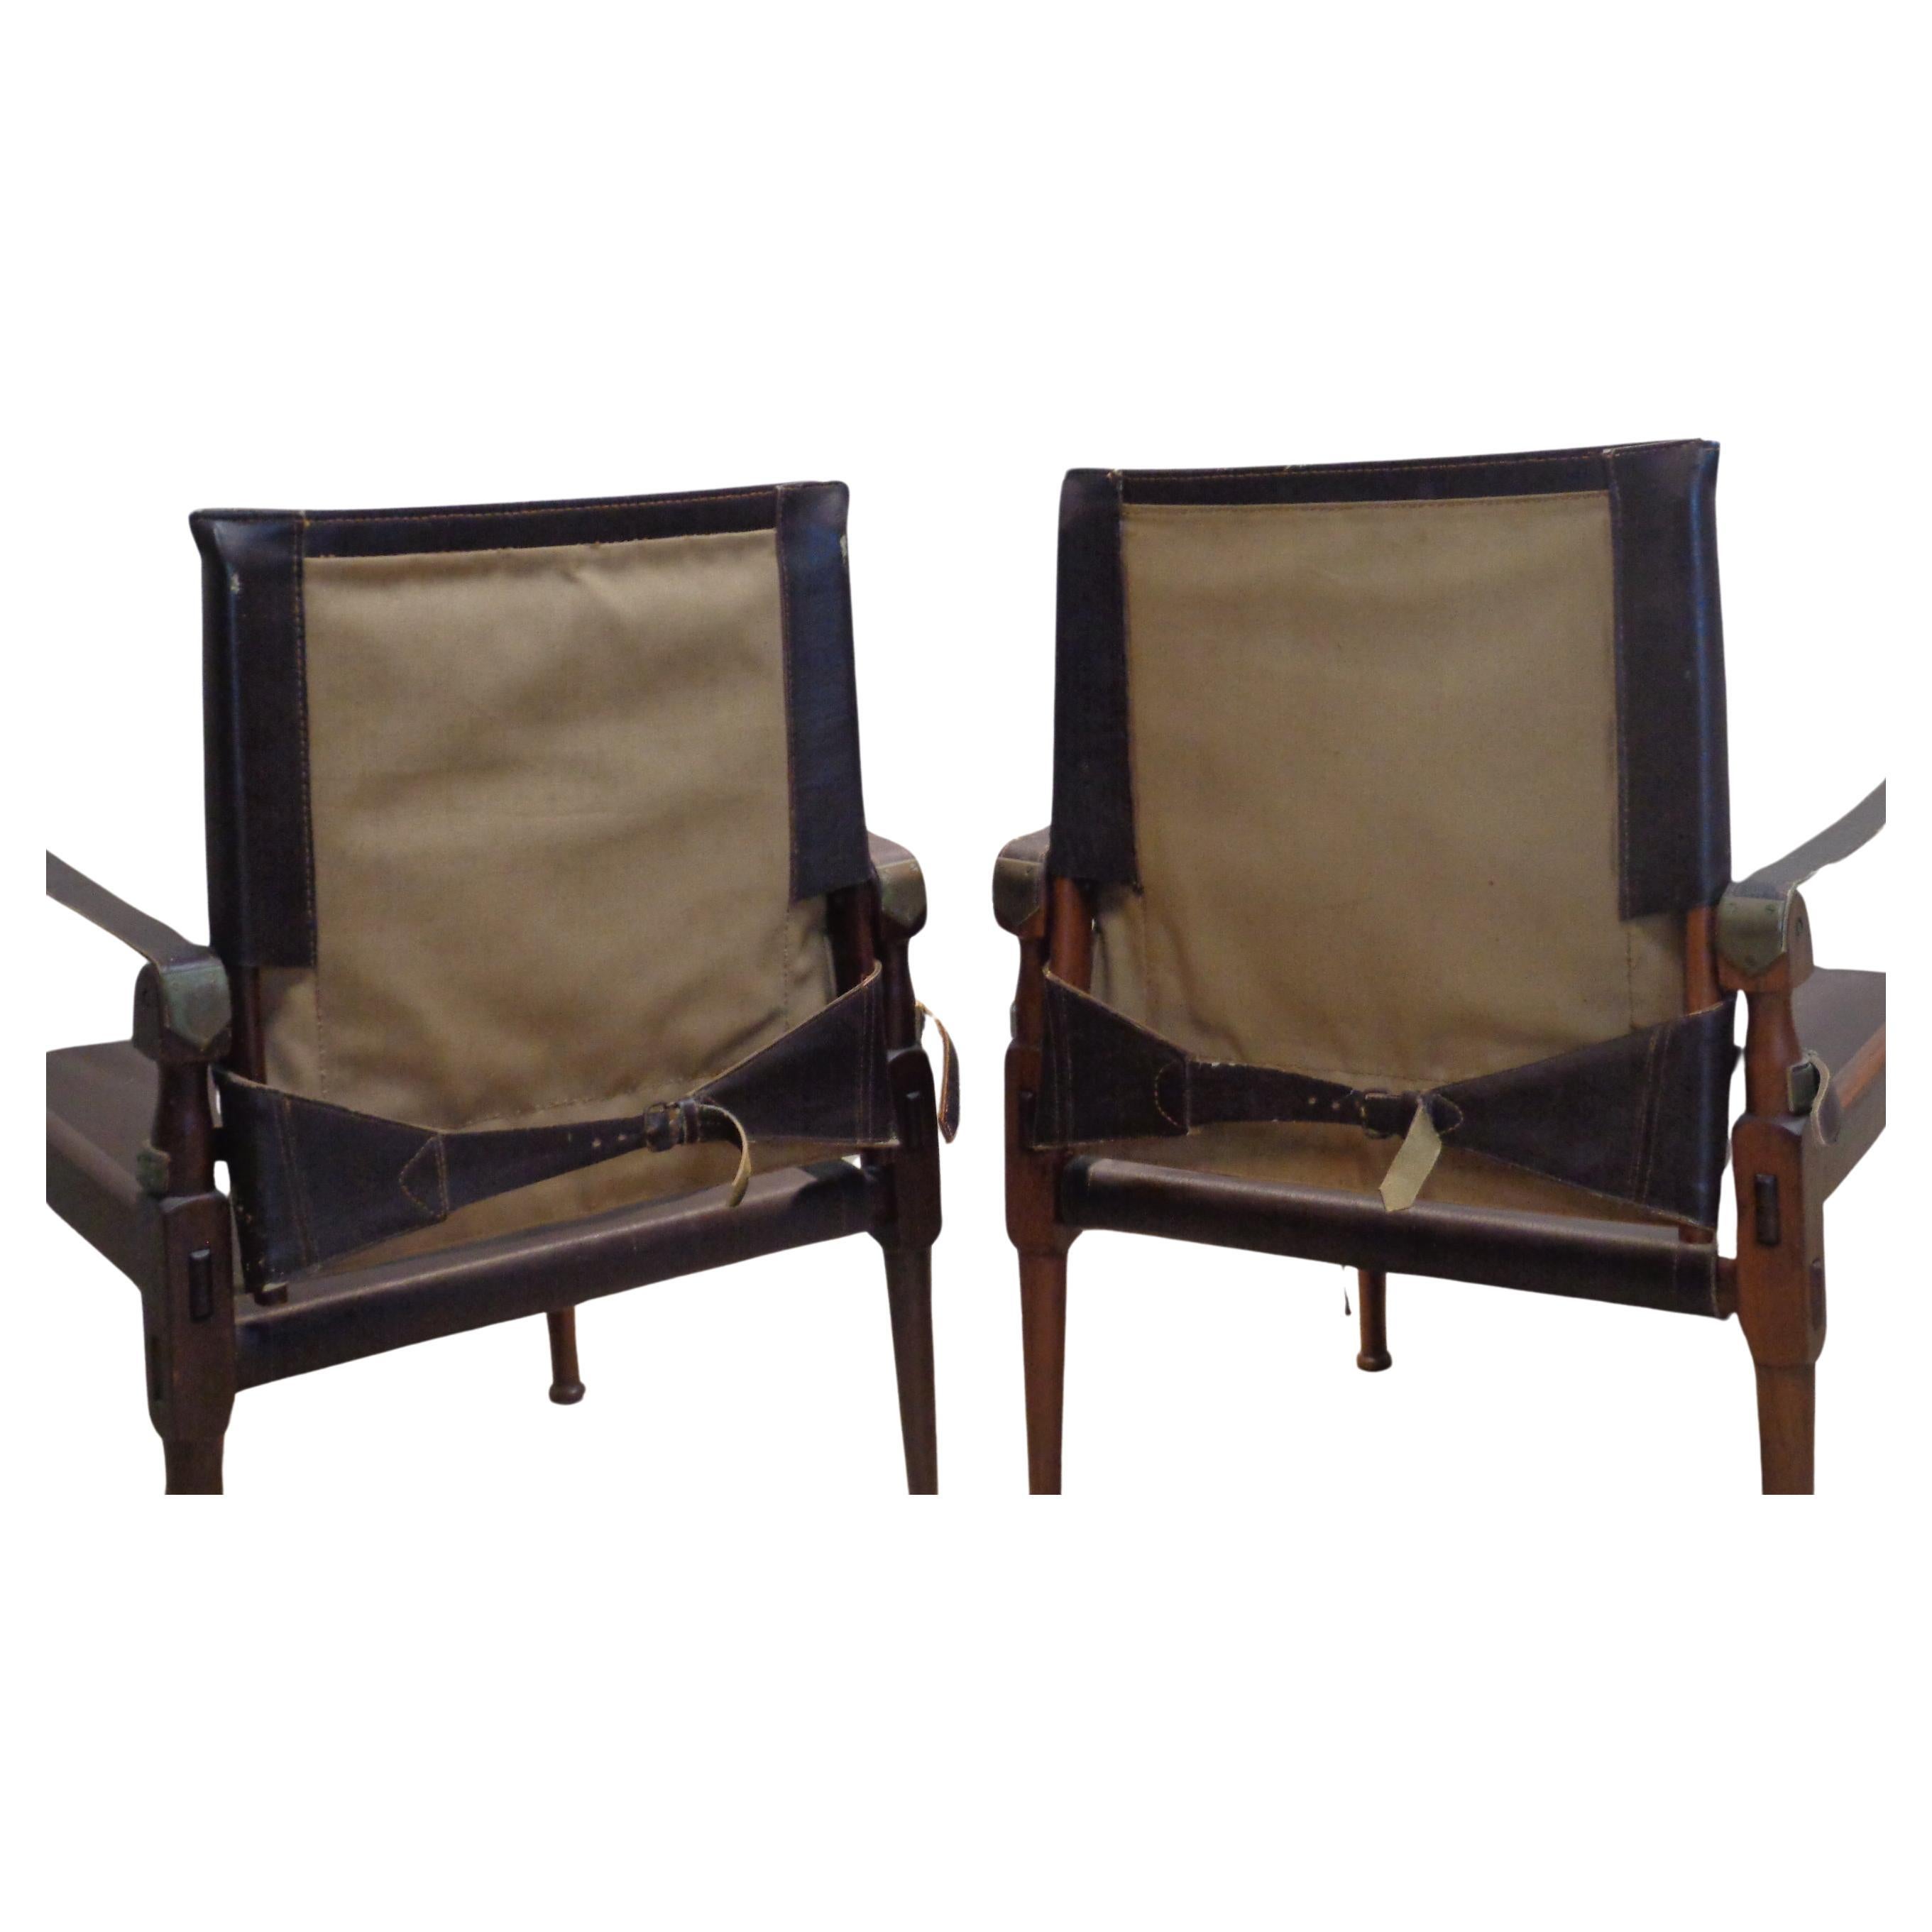  Campaign Style Safari Chairs, M. Hayat & Bros. 1960-1970 For Sale 1